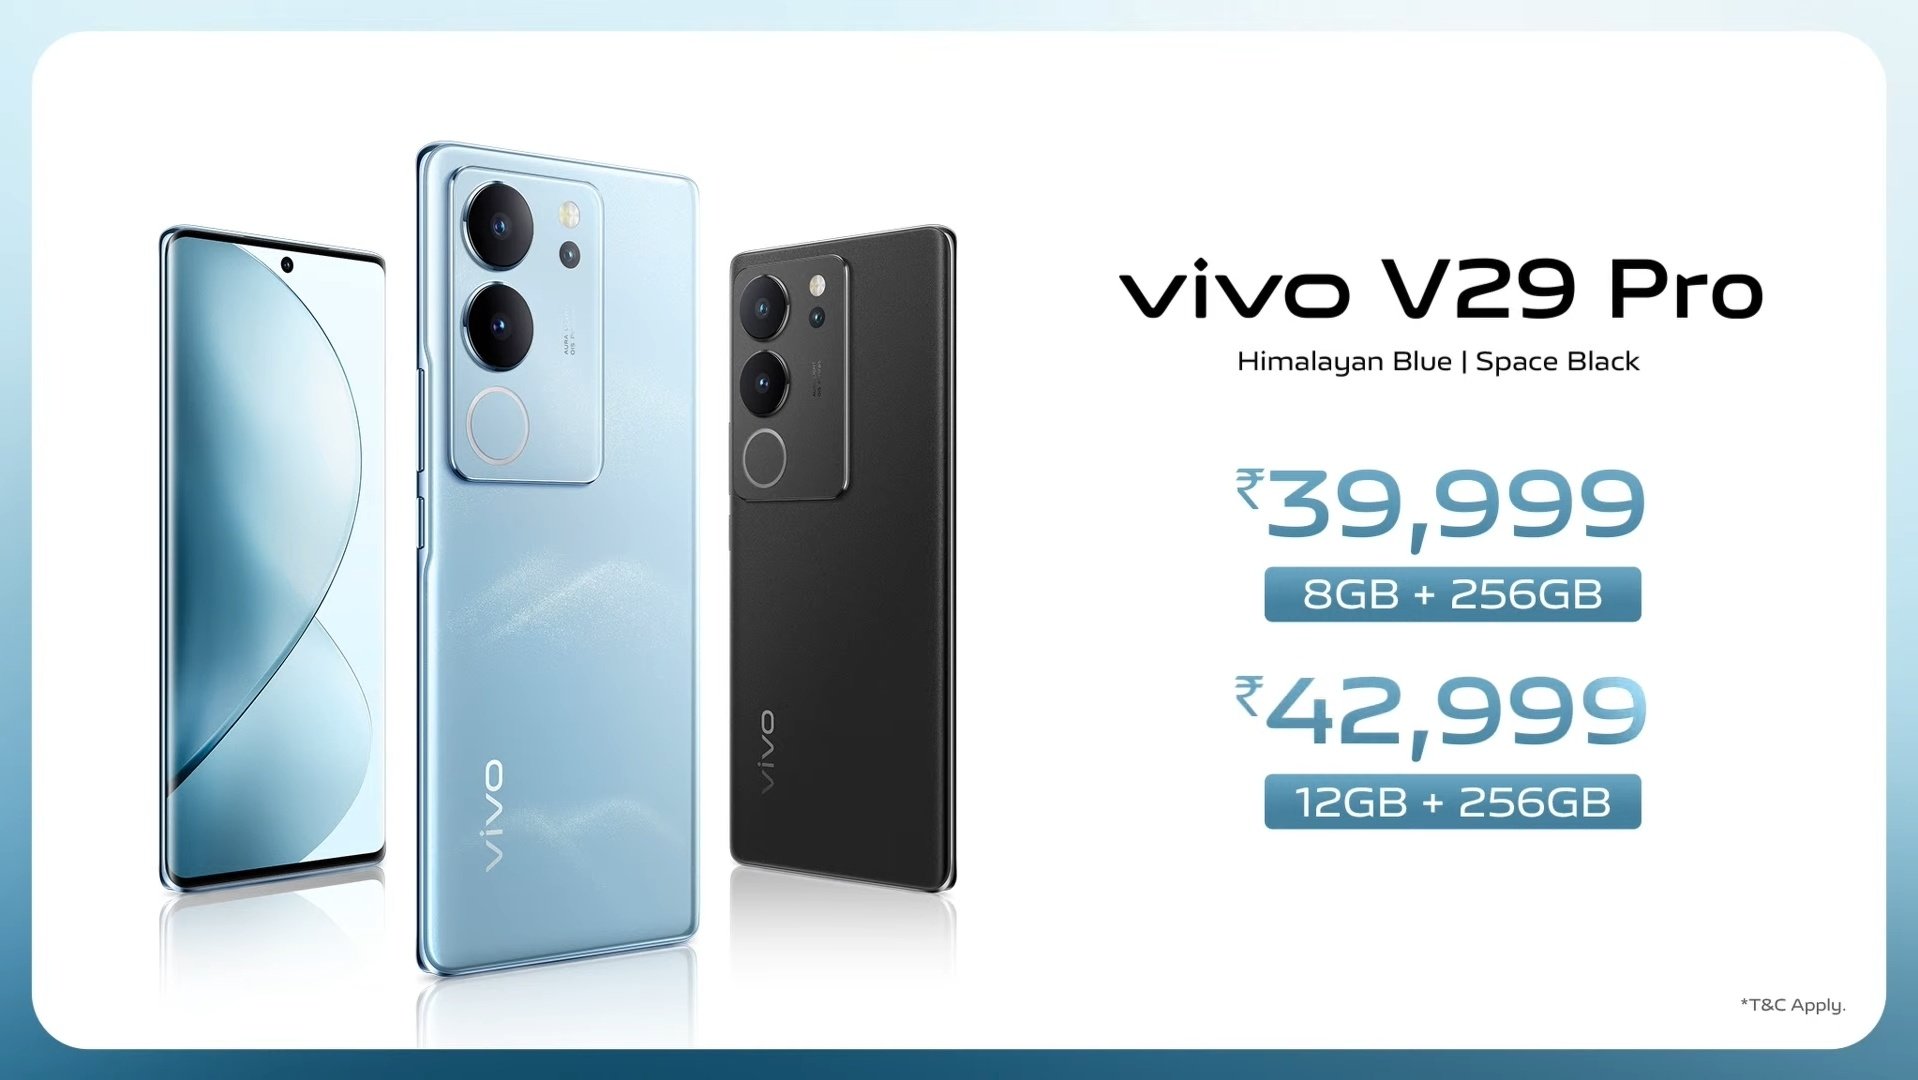 Vivo V29, Vivo V29 Pro launched in India; check price, features, other  details - BusinessToday